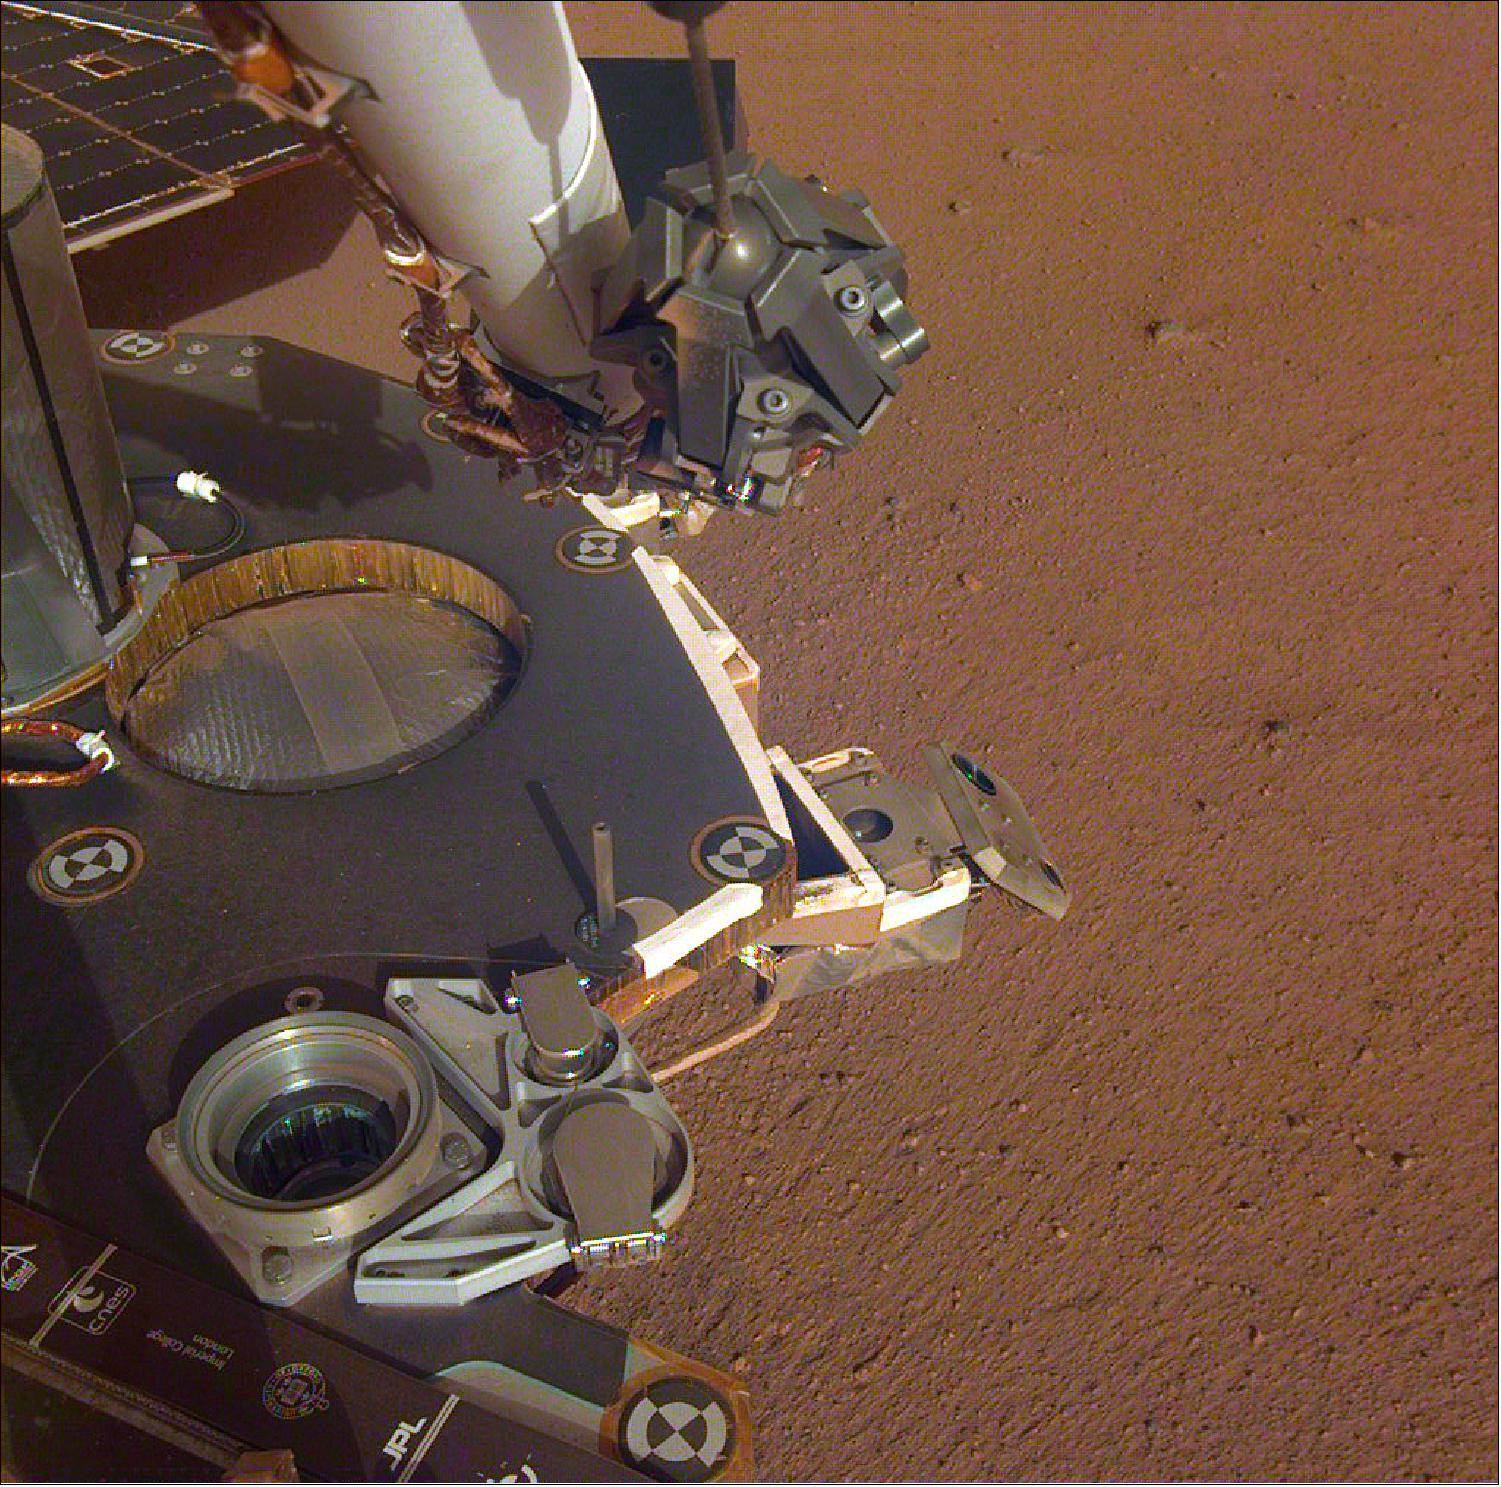 Figure 53: A partial view of the deck of NASA's InSight lander, where it stands on the Martian plains Elysium Planitia. The color-calibrated image was received on 4 December 2018 (Sol 8). InSight's robotic arm with its stowed grapple can be seen above the deck, and jutting out from the front of the deck is one of the boxy attitude control system thrusters that helped control the spacecraft's landing. The circular silver inset of the propellant tank can also be seen in the middle of the image, as well as one of the connections for the aeroshell and parachute, which looks like a cupholder in the foreground. Next to the propellant tank is the UHF antenna, which helps the lander communicate with Earth. In the background, part of one of InSight's solar panels is visible (image credit: NASA/JPL-Caltech)